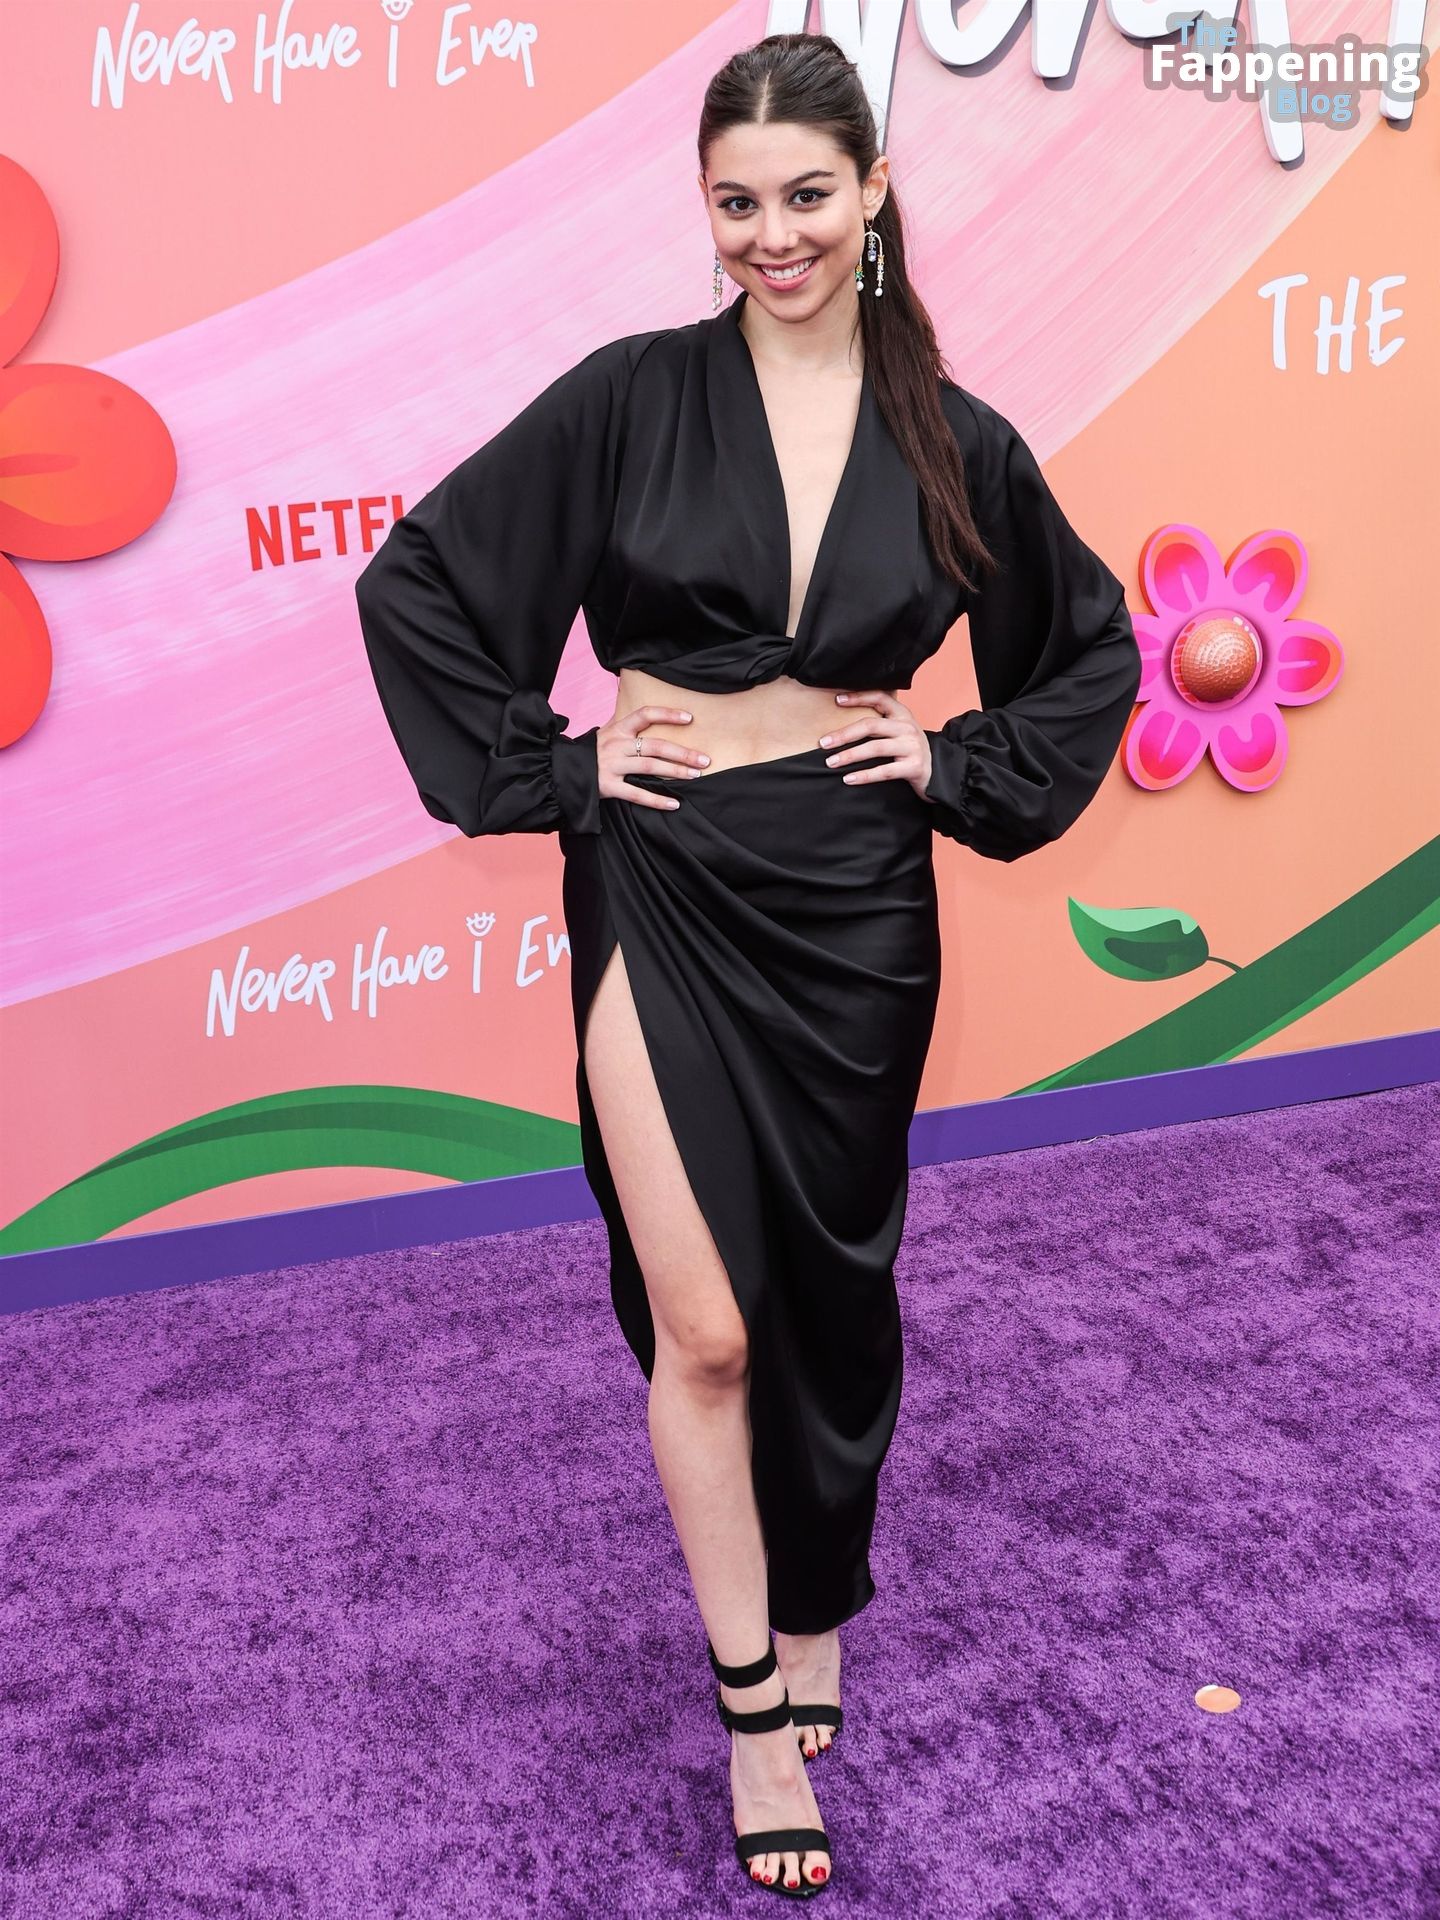 Kira Kosarin Shows Off Her Sexy Legs at the LA Premiere Screening Event of Netflix’s ‘Never Have I Ever’ Season 4 (47 Photos + Video)